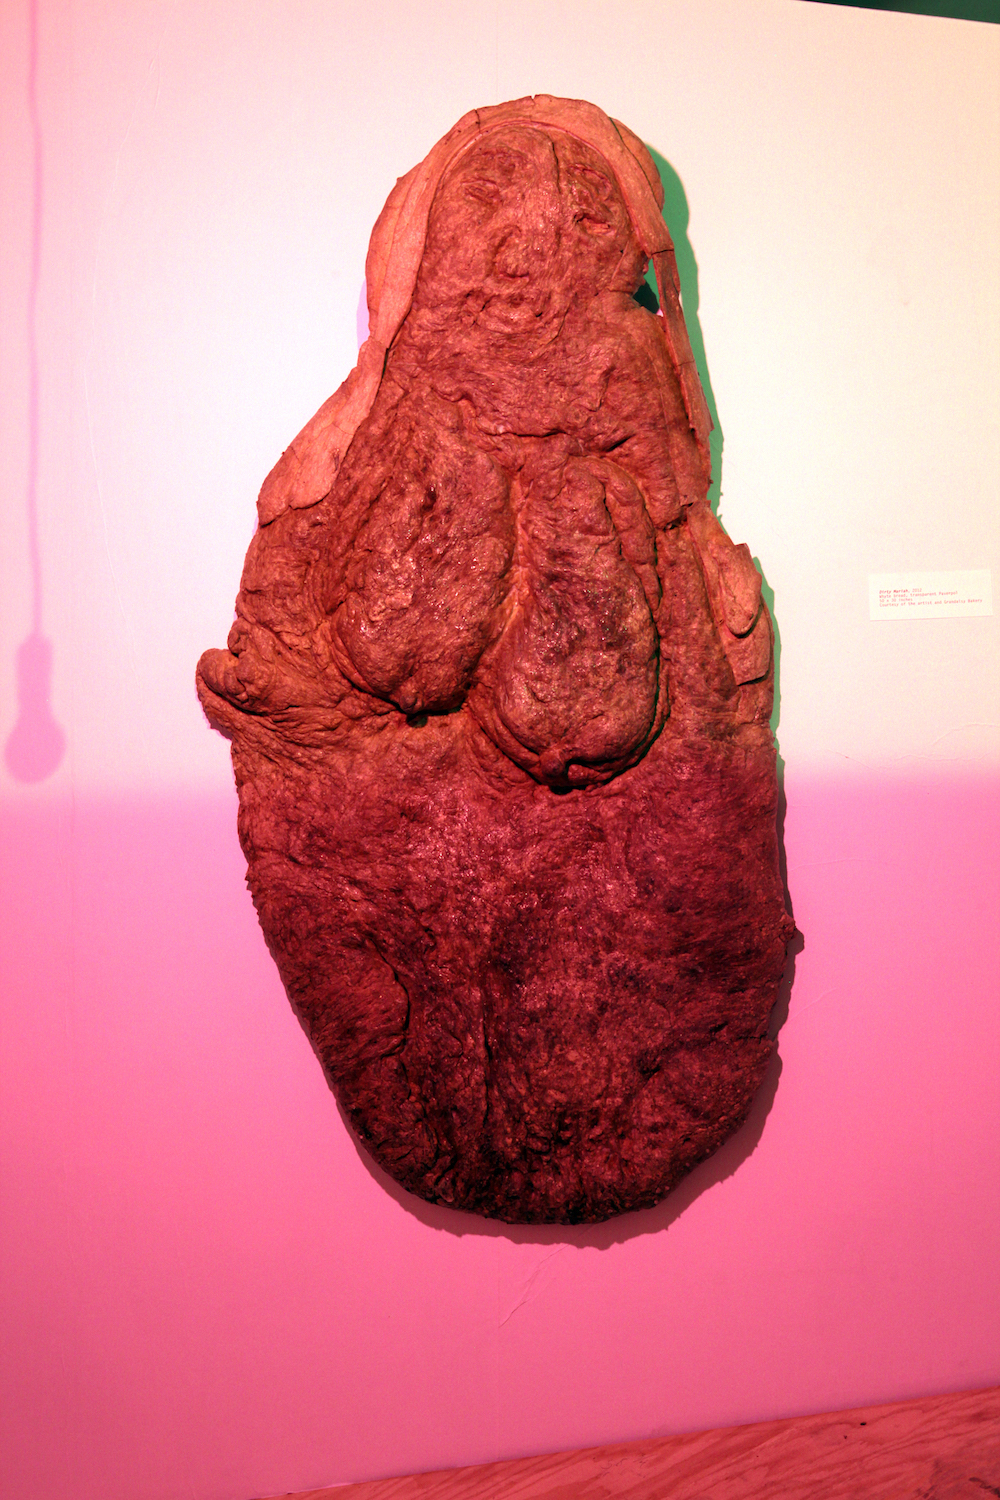 Vaginal Davis, *Dirty Mariah*, 2012. Whyte bread, transparent Paverpol, 50 x 30 inches, Courtesy of the artist and Grandaisy Bakery